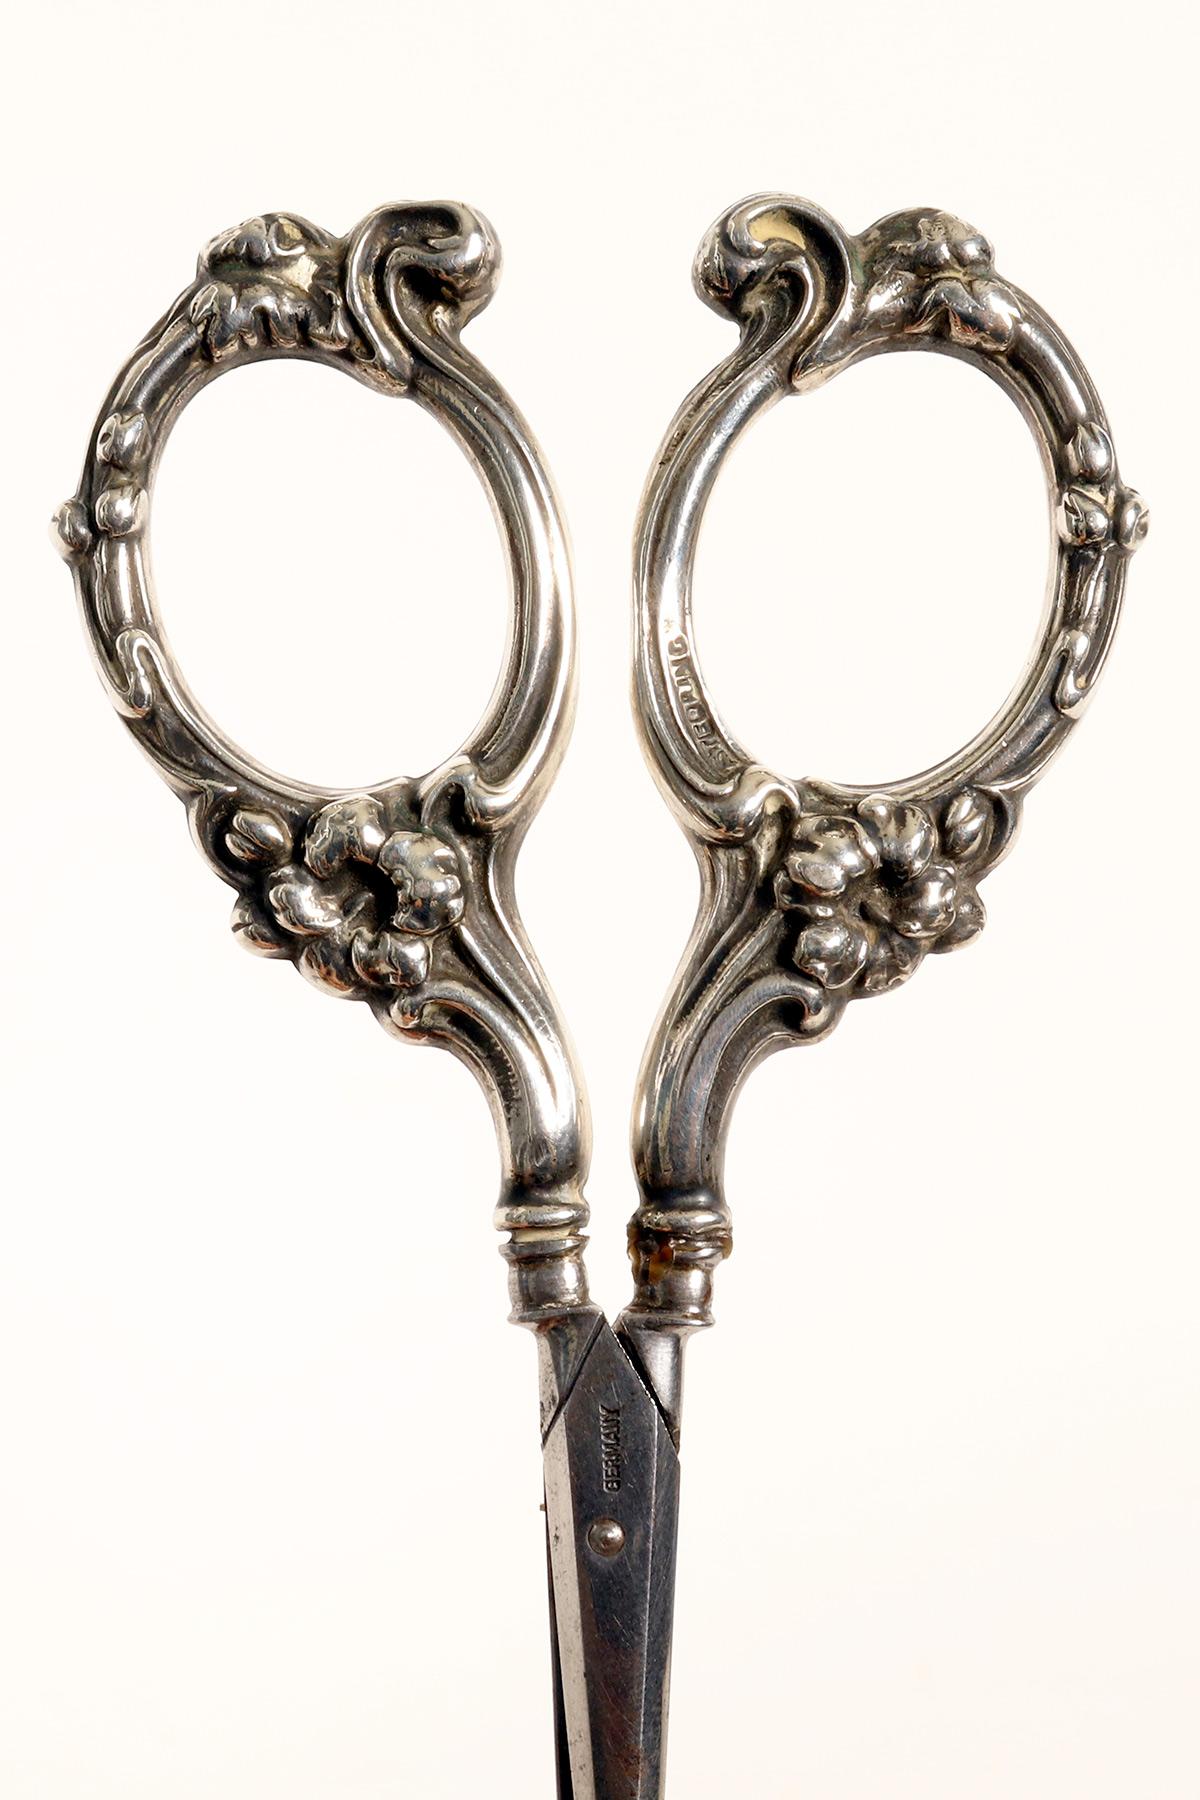 20th Century Sterling Silver Scissors to Cut the Stems of the Bunches of Grapes, USA, 1900 For Sale